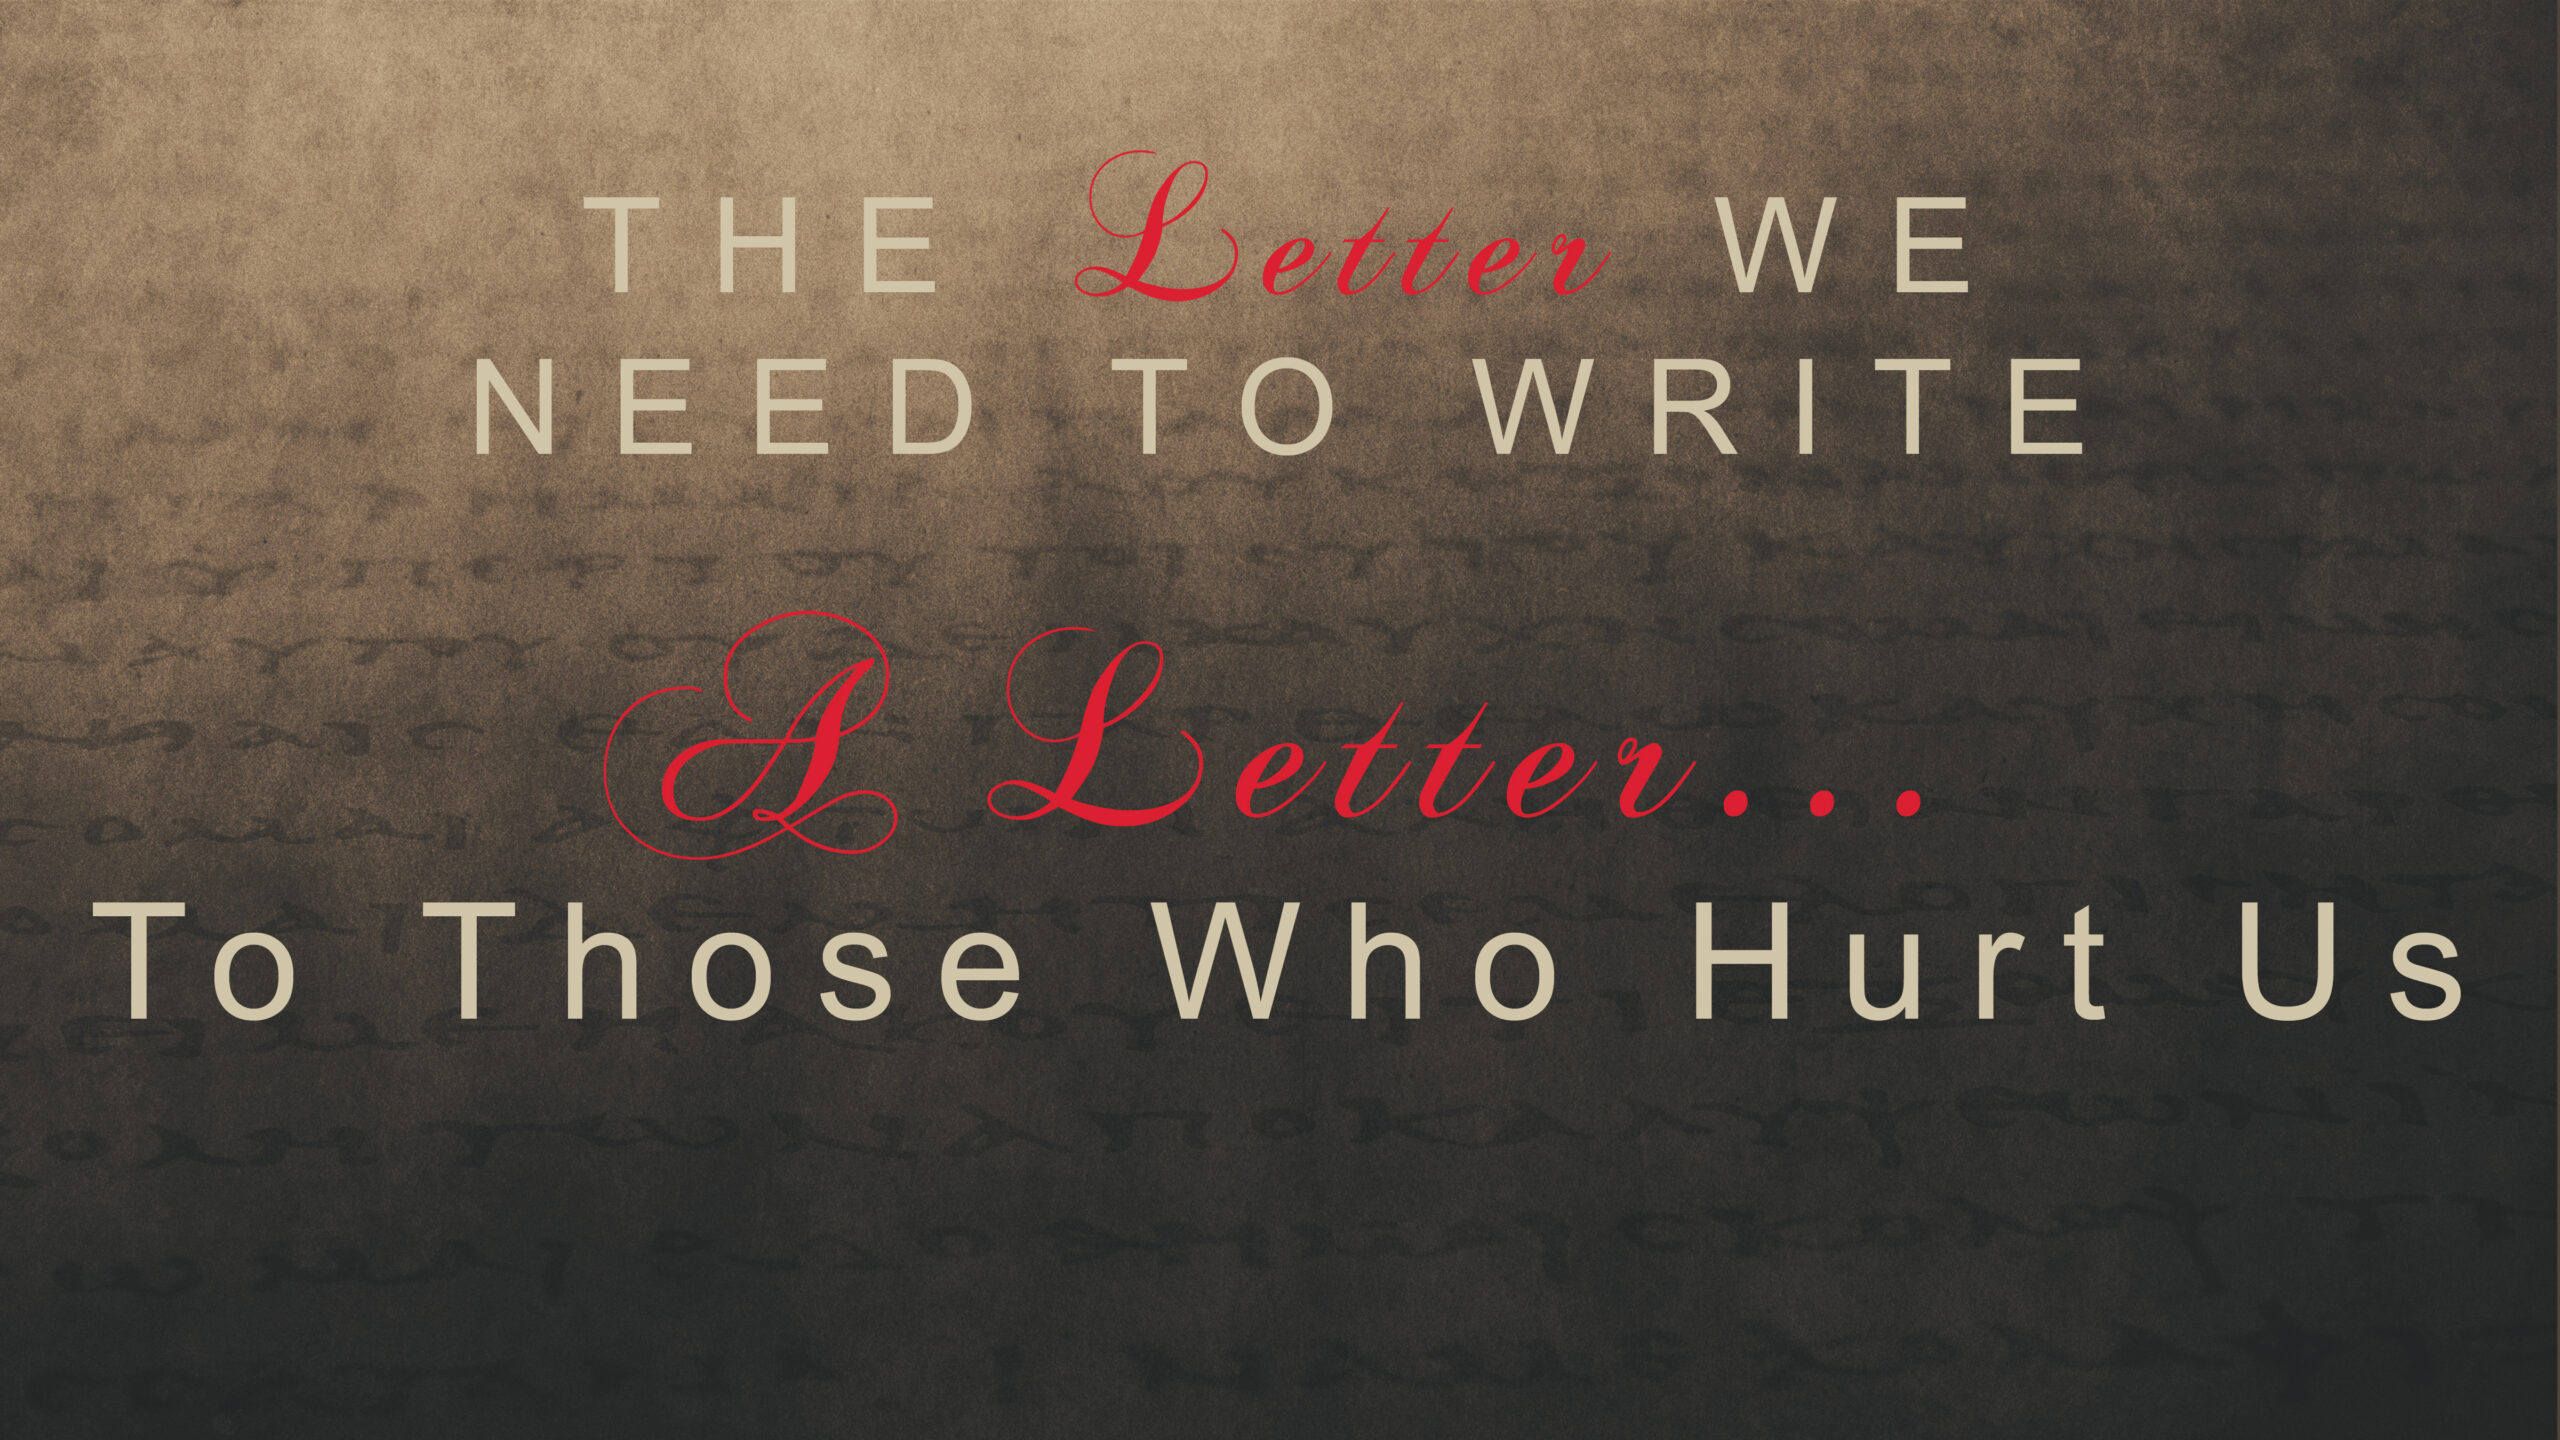 The Letter We Nee to Write PART 5 “A Letter…To Those Who Hurt Us” (Traditional Service)